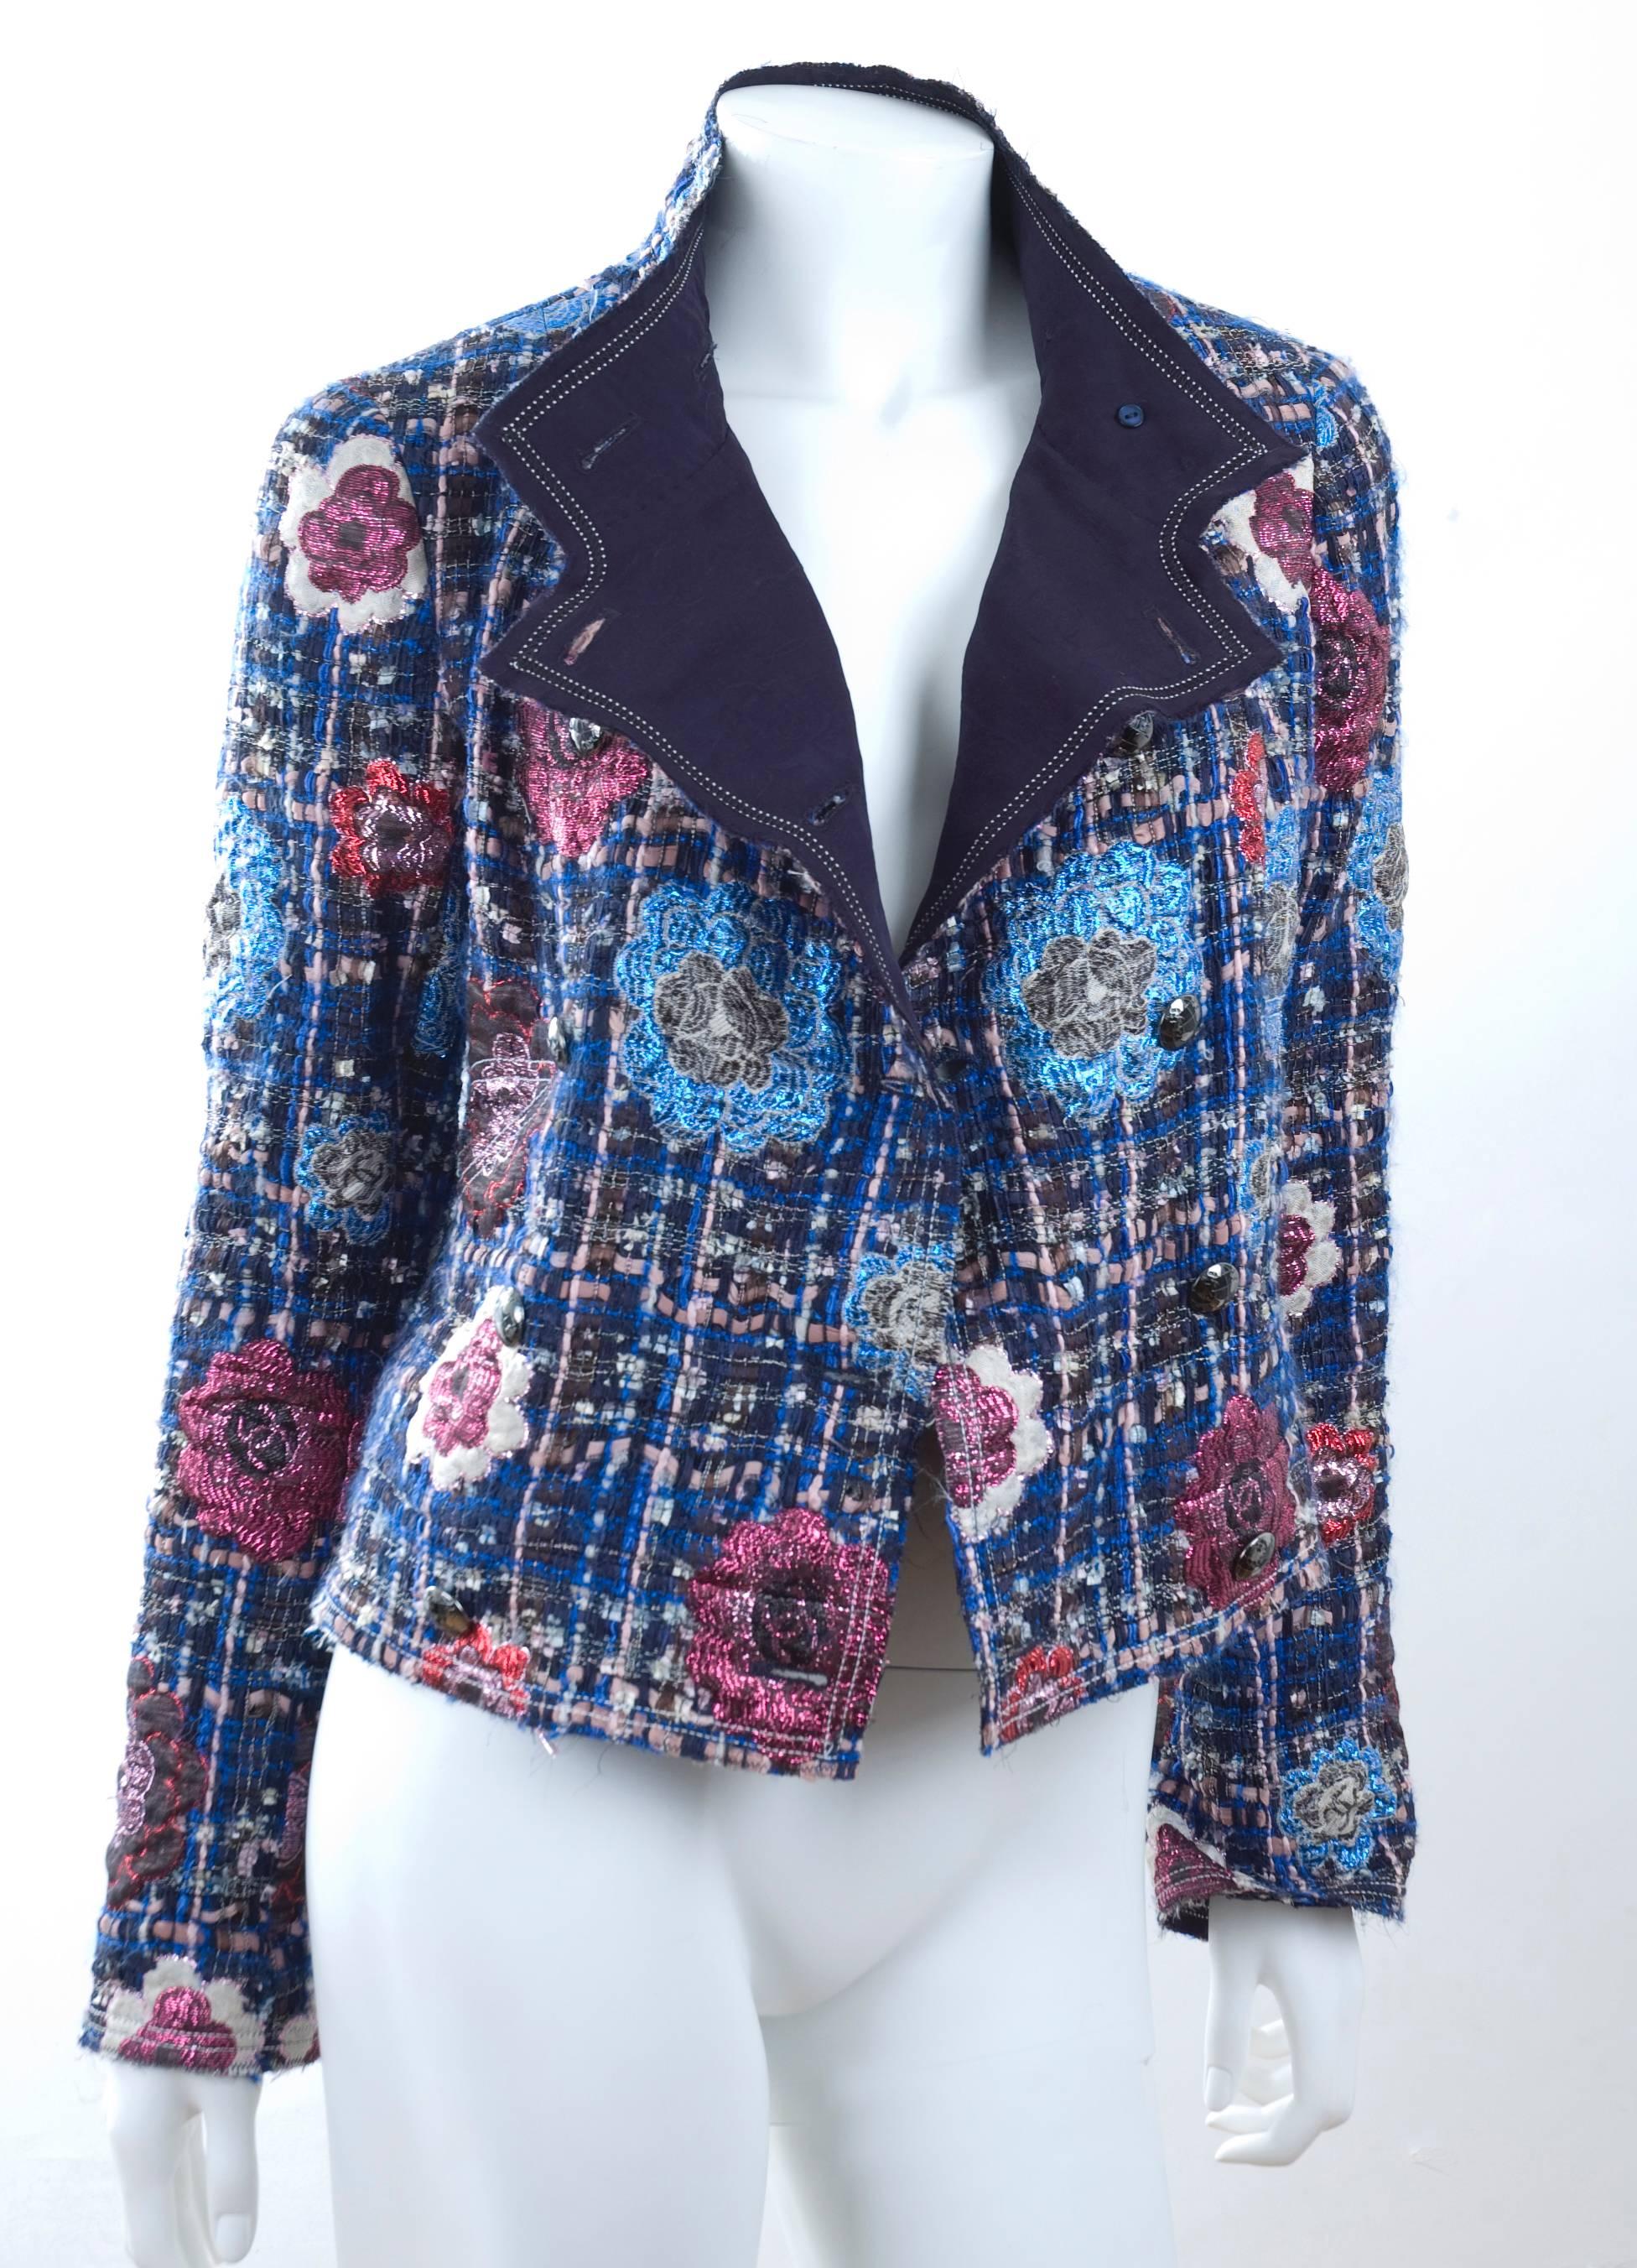 2008 Chanel Jacket with Metallic Camellias in Blue and Pink. In Excellent Condition For Sale In Hamburg, Deutschland